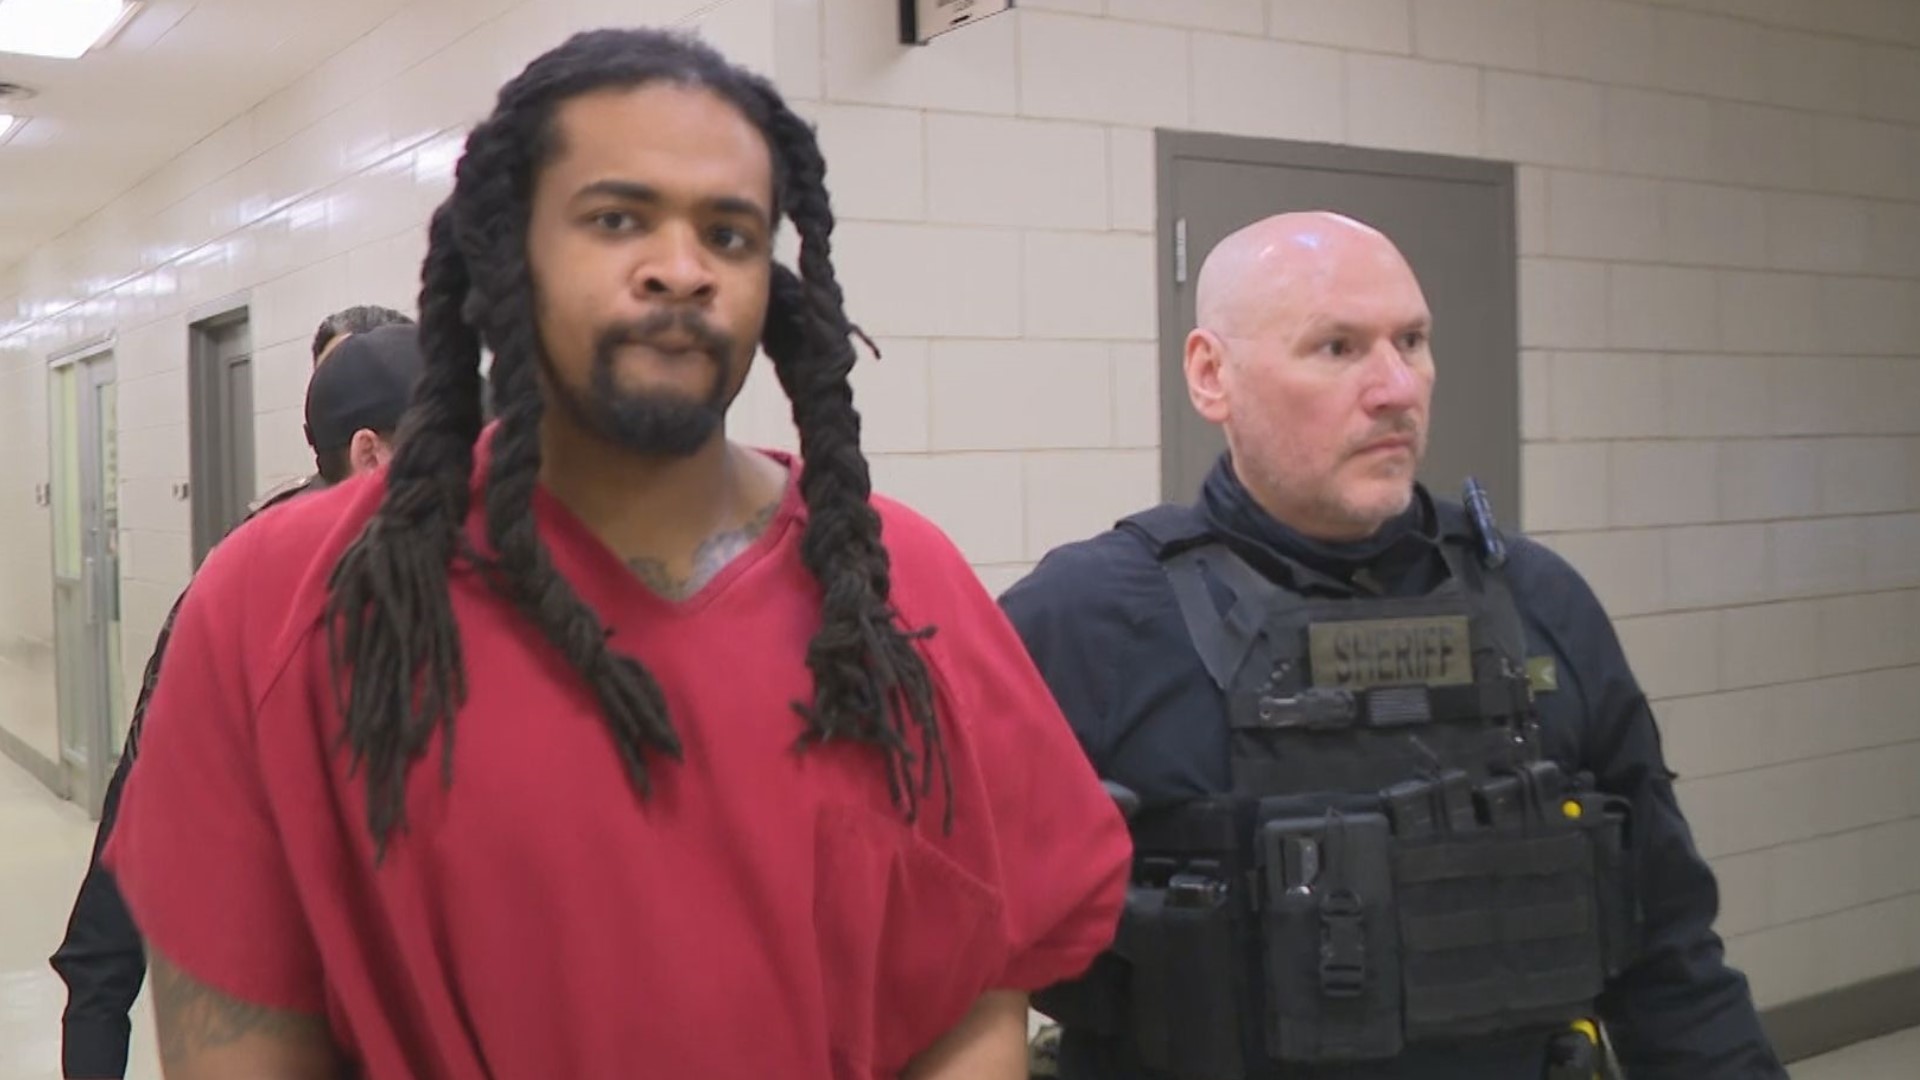 Mylik Hill made his first court appearance Thursday in the shooting of IMPD officer Thomas Mangan.